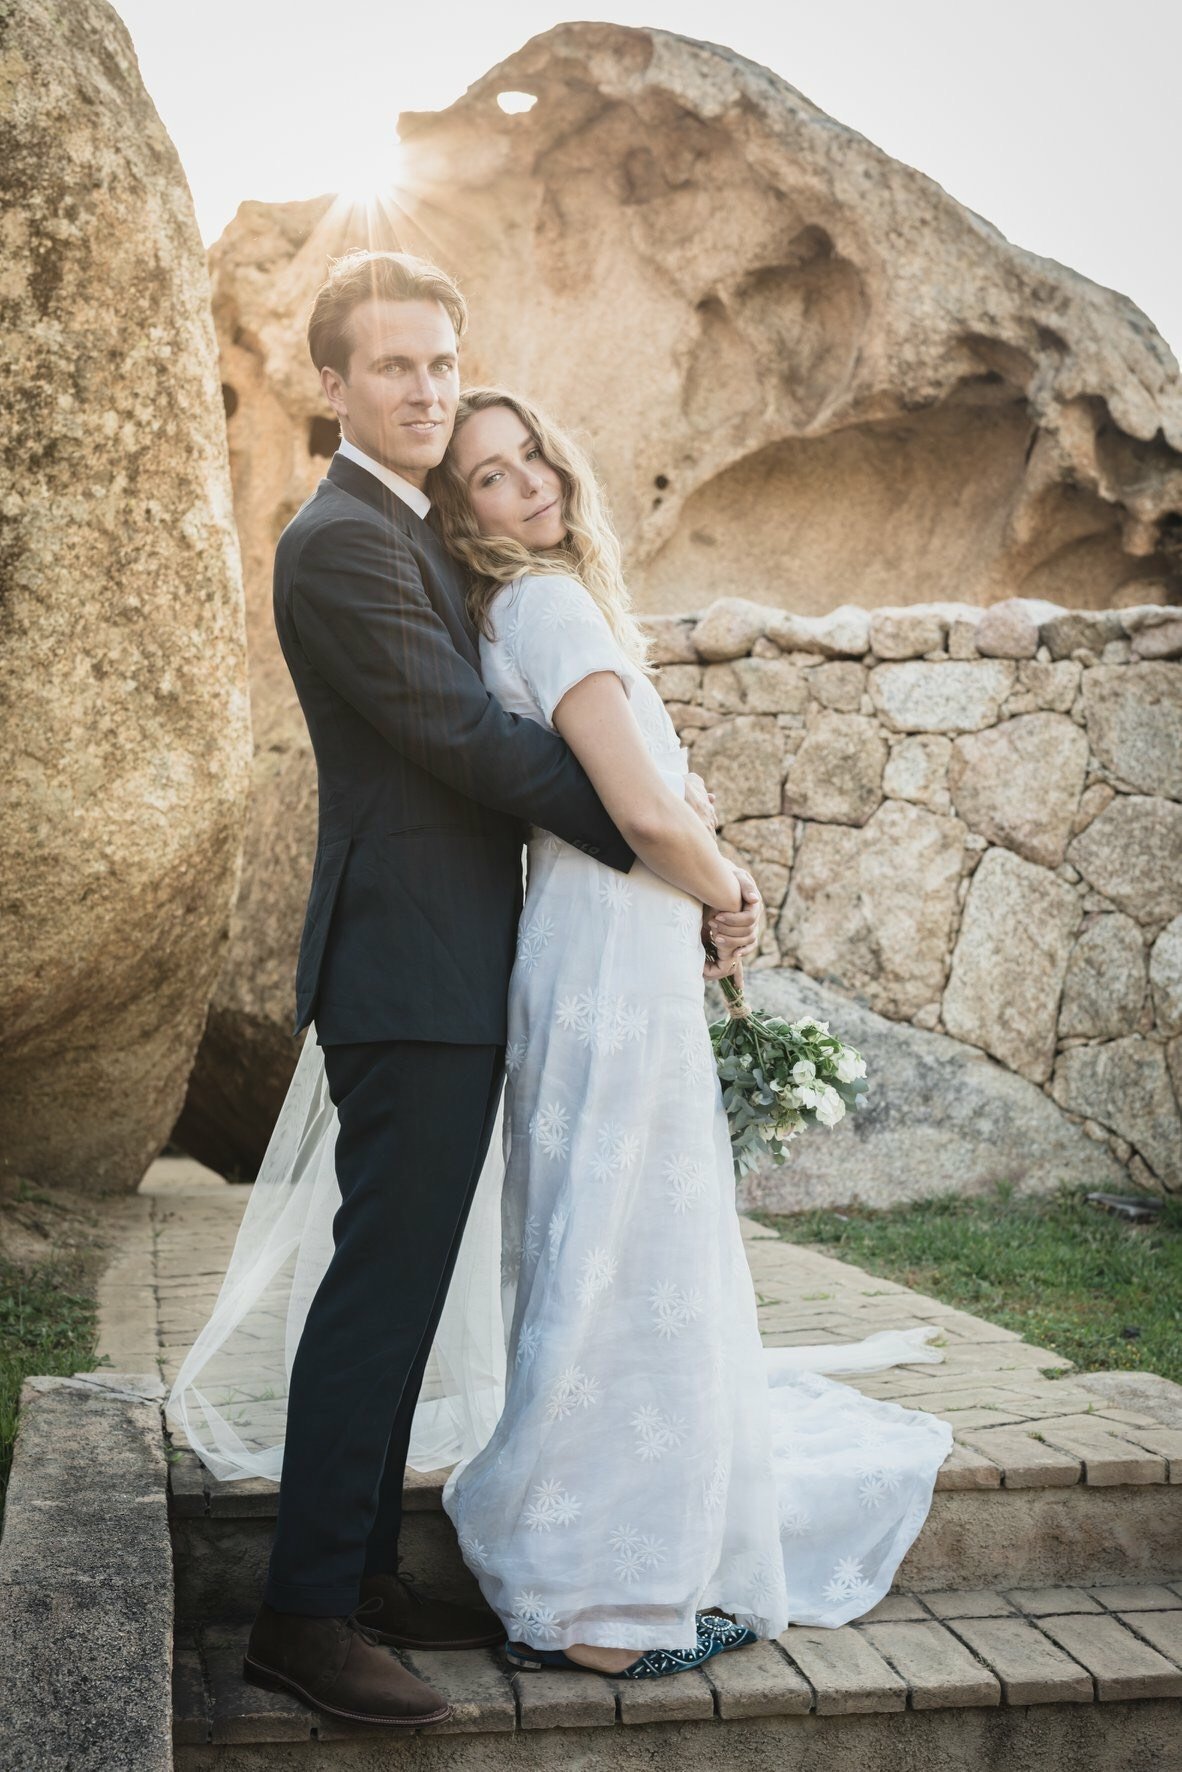 Nature and wild vibes for this Destination Wedding in Sardinia